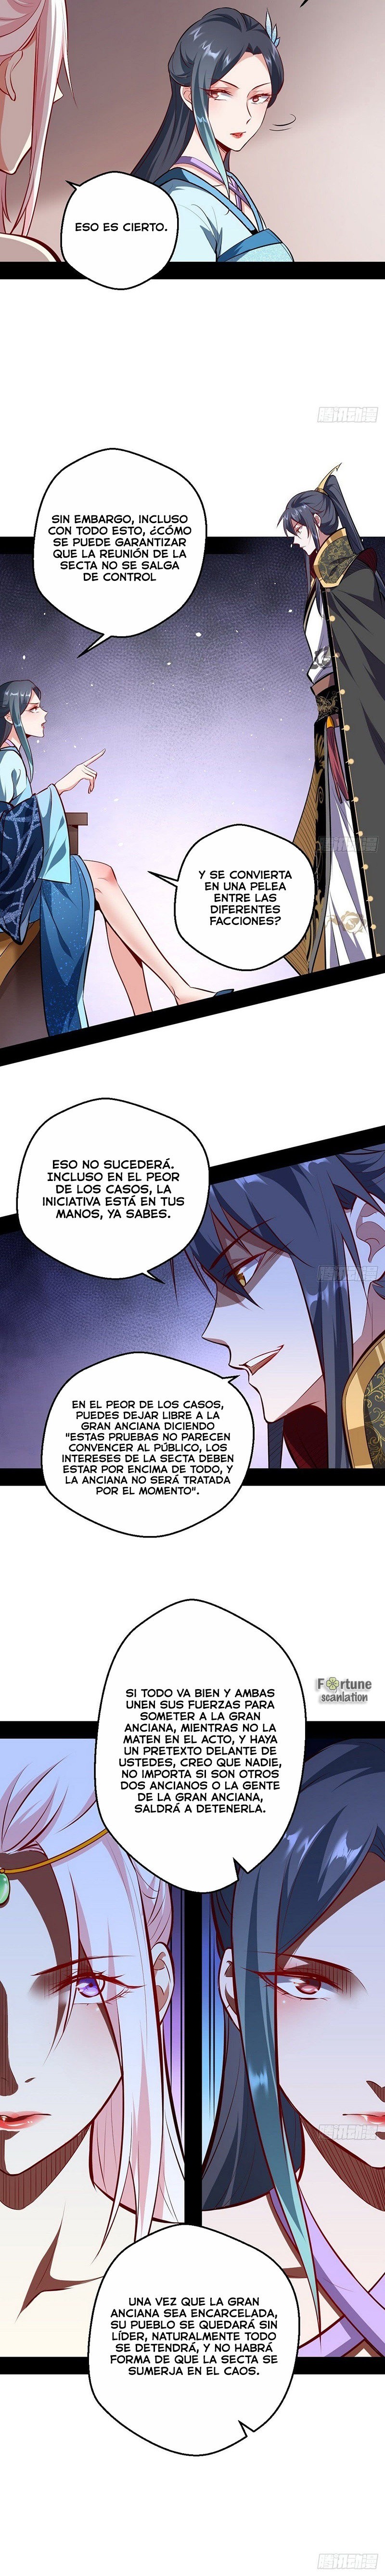 Manga Soy un dios maligno Chapter 40 image number 8